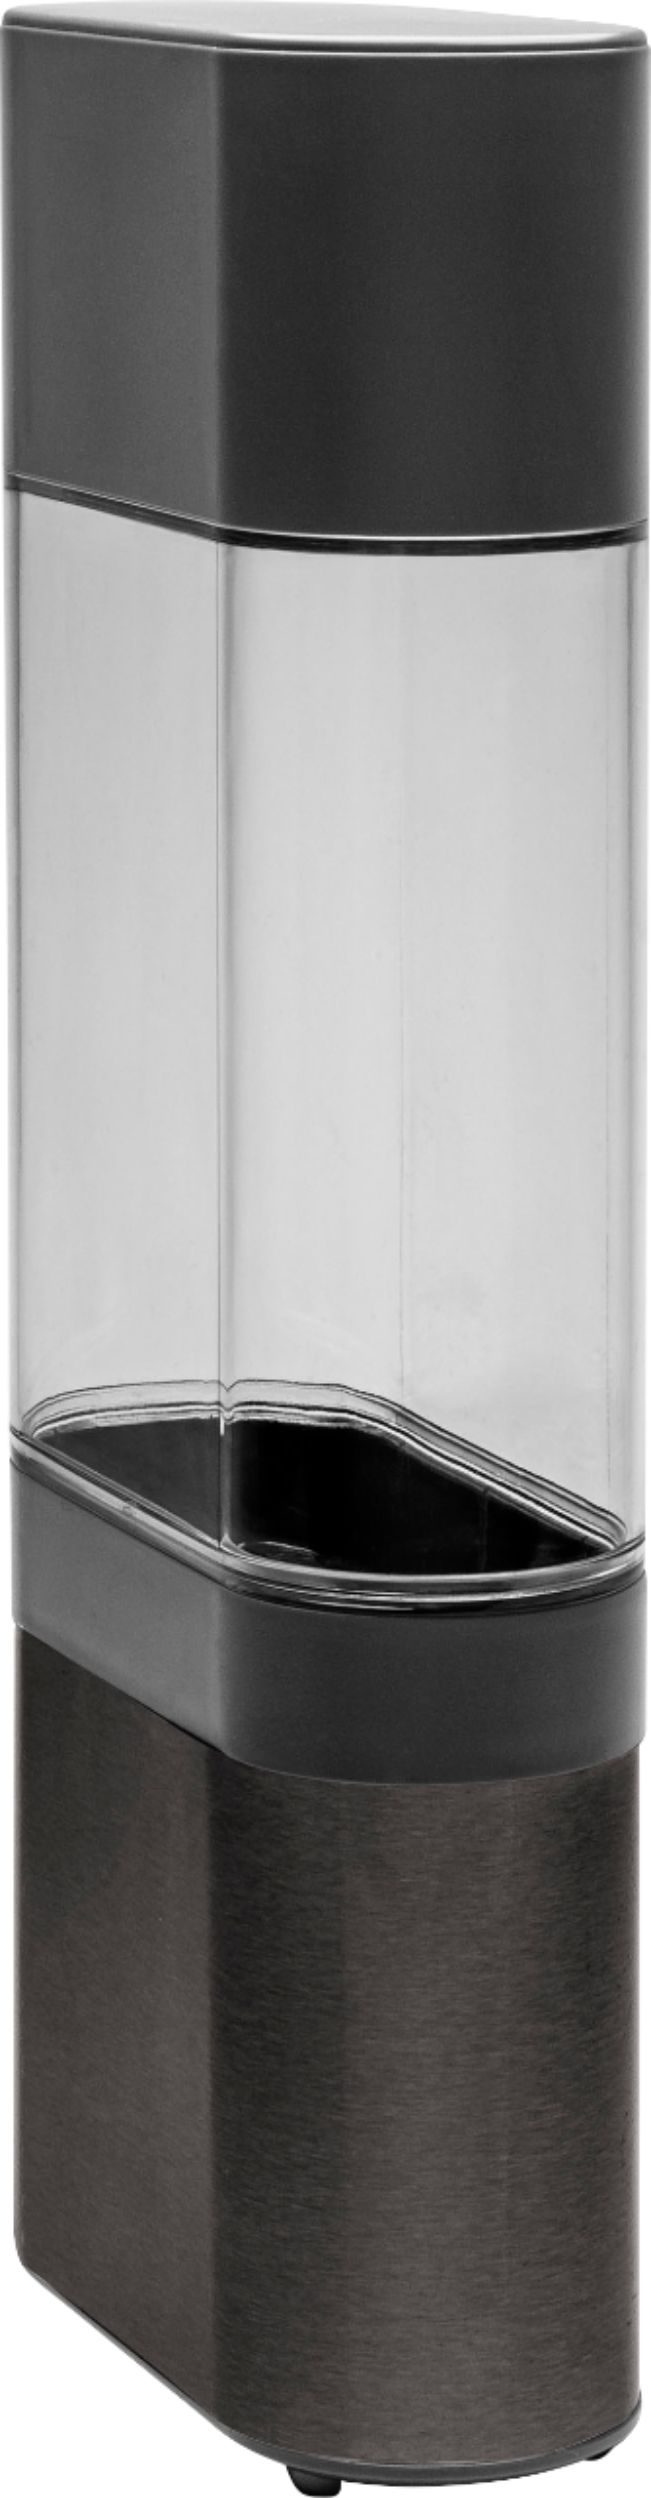 Angle View: GE Profile - Opal 2.0 - Current Side Tank Accessory (3/4 gal) - Black